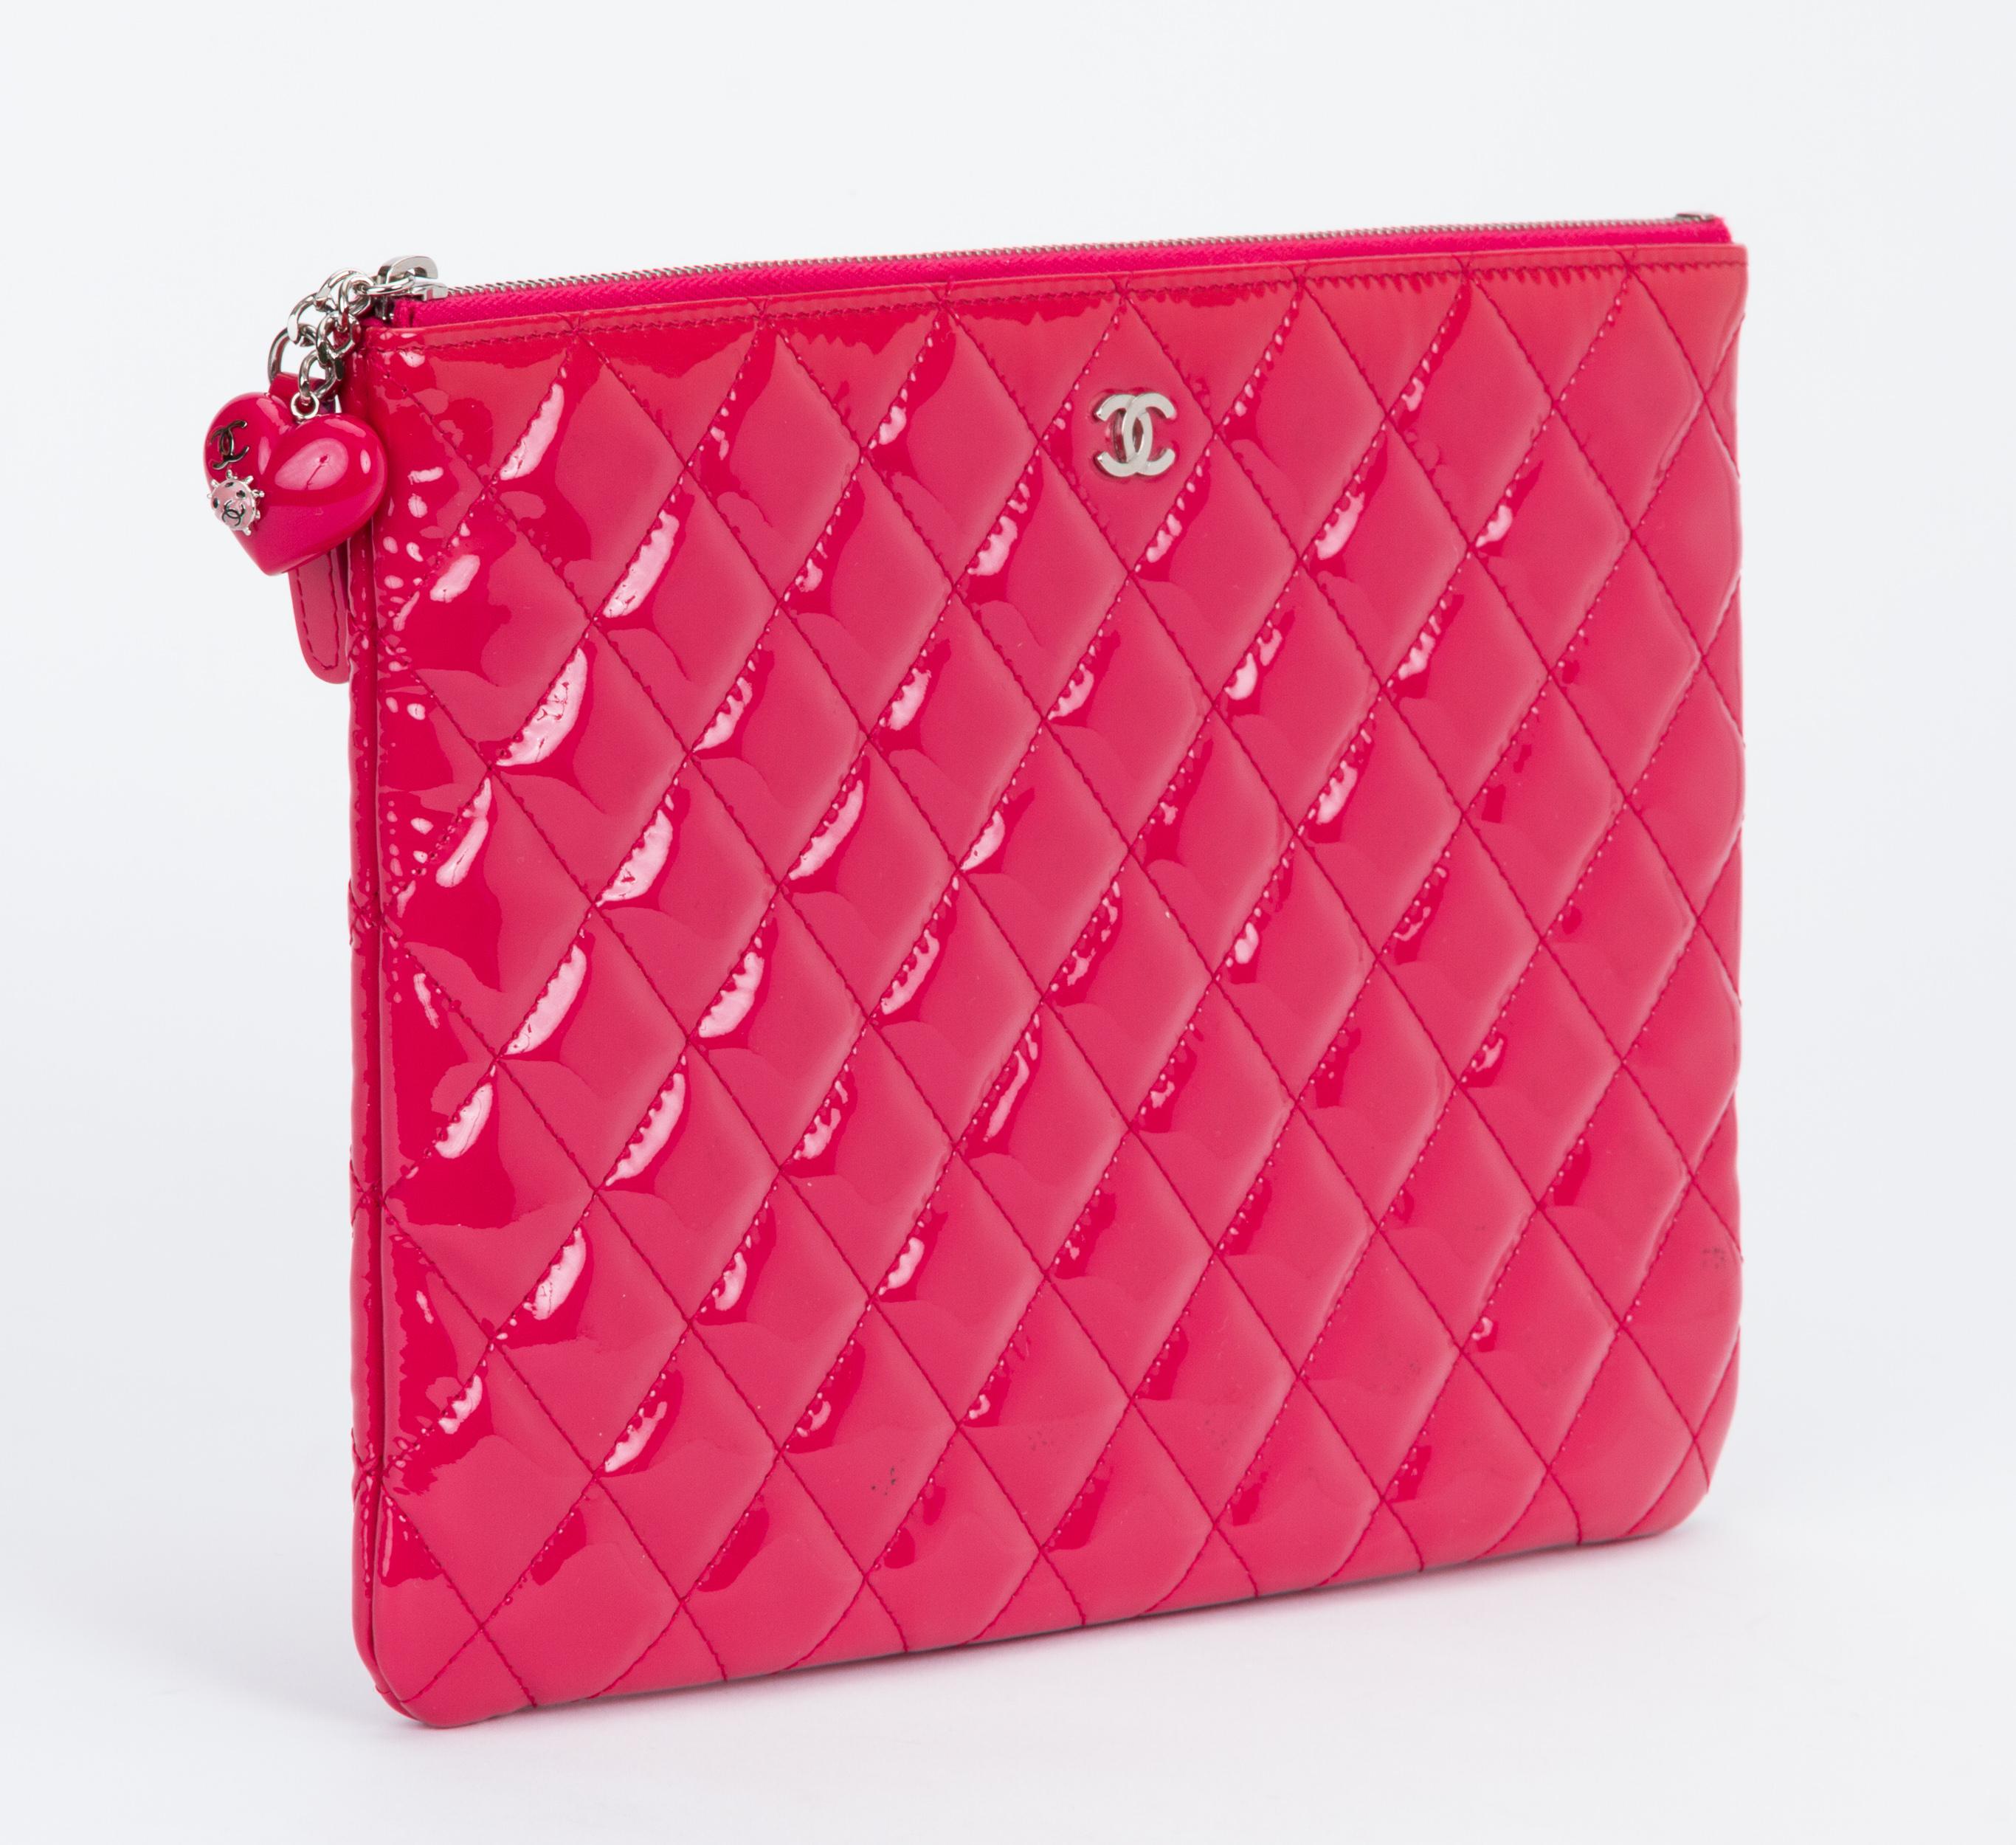 Chanel hot pink quilted patent leather clutch with heart charm. Excellent condition. Collection spring 2015. Comes with hologram, id card, dust bag and original box.